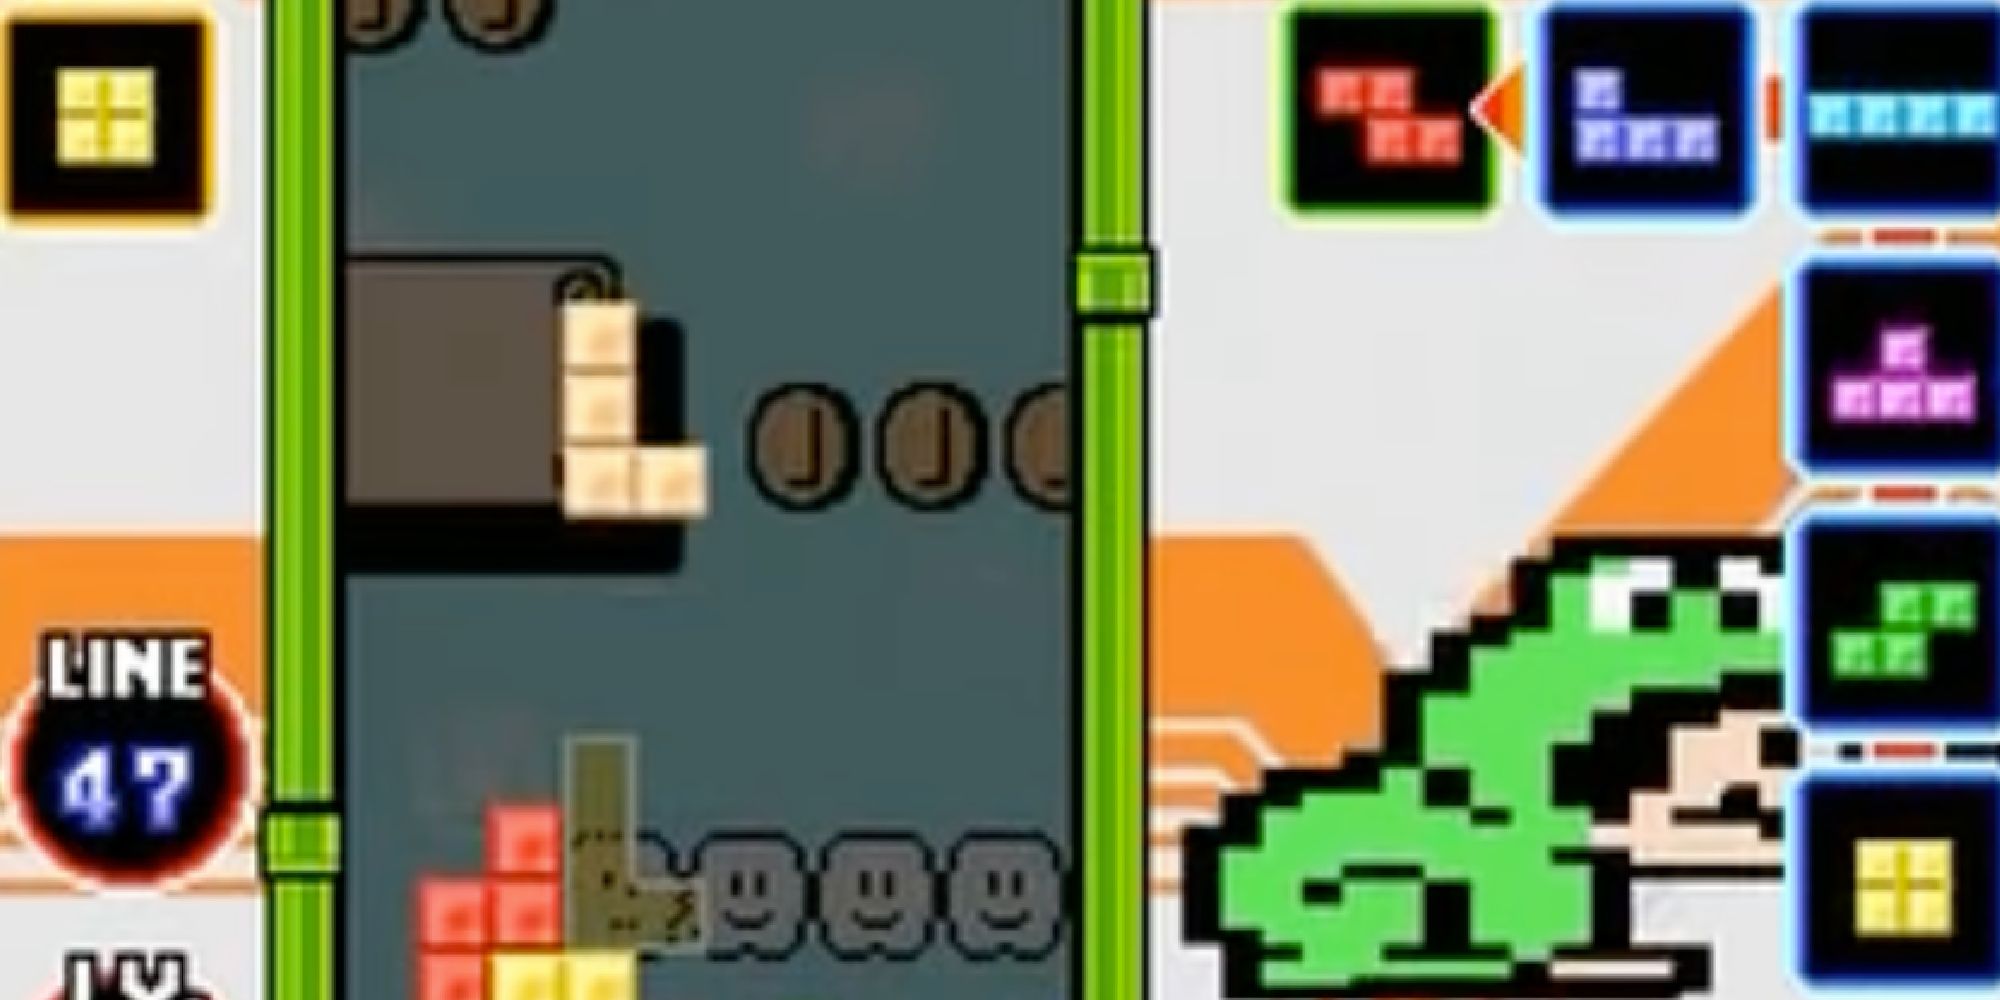 A screenshot from Tetris DS, showing a falling block on a Mario-themed background